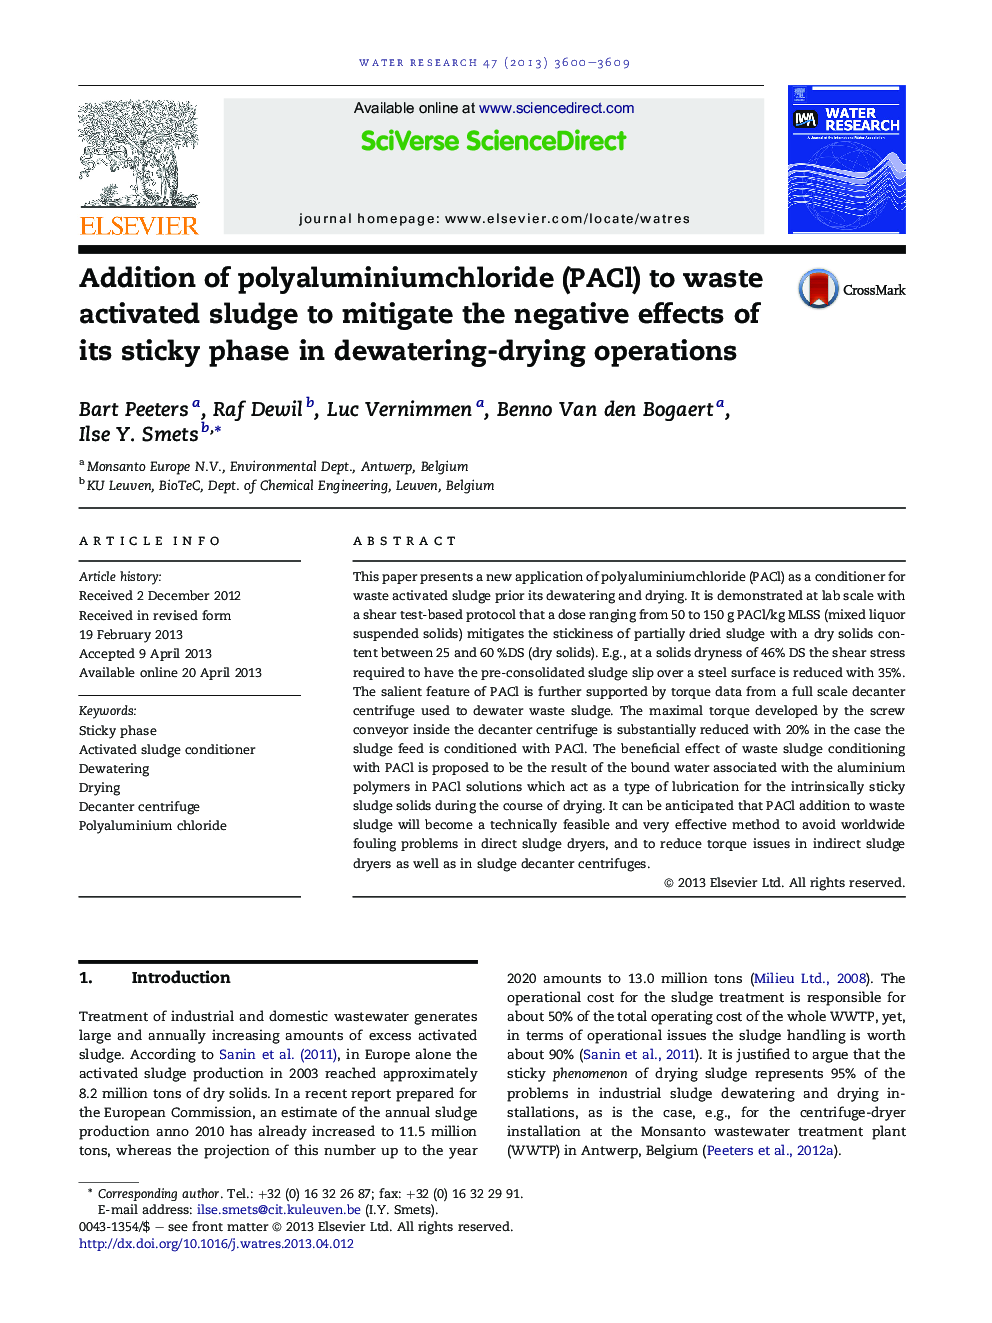 Addition of polyaluminiumchloride (PACl) to waste activated sludge to mitigate the negative effects of its sticky phase in dewatering-drying operations